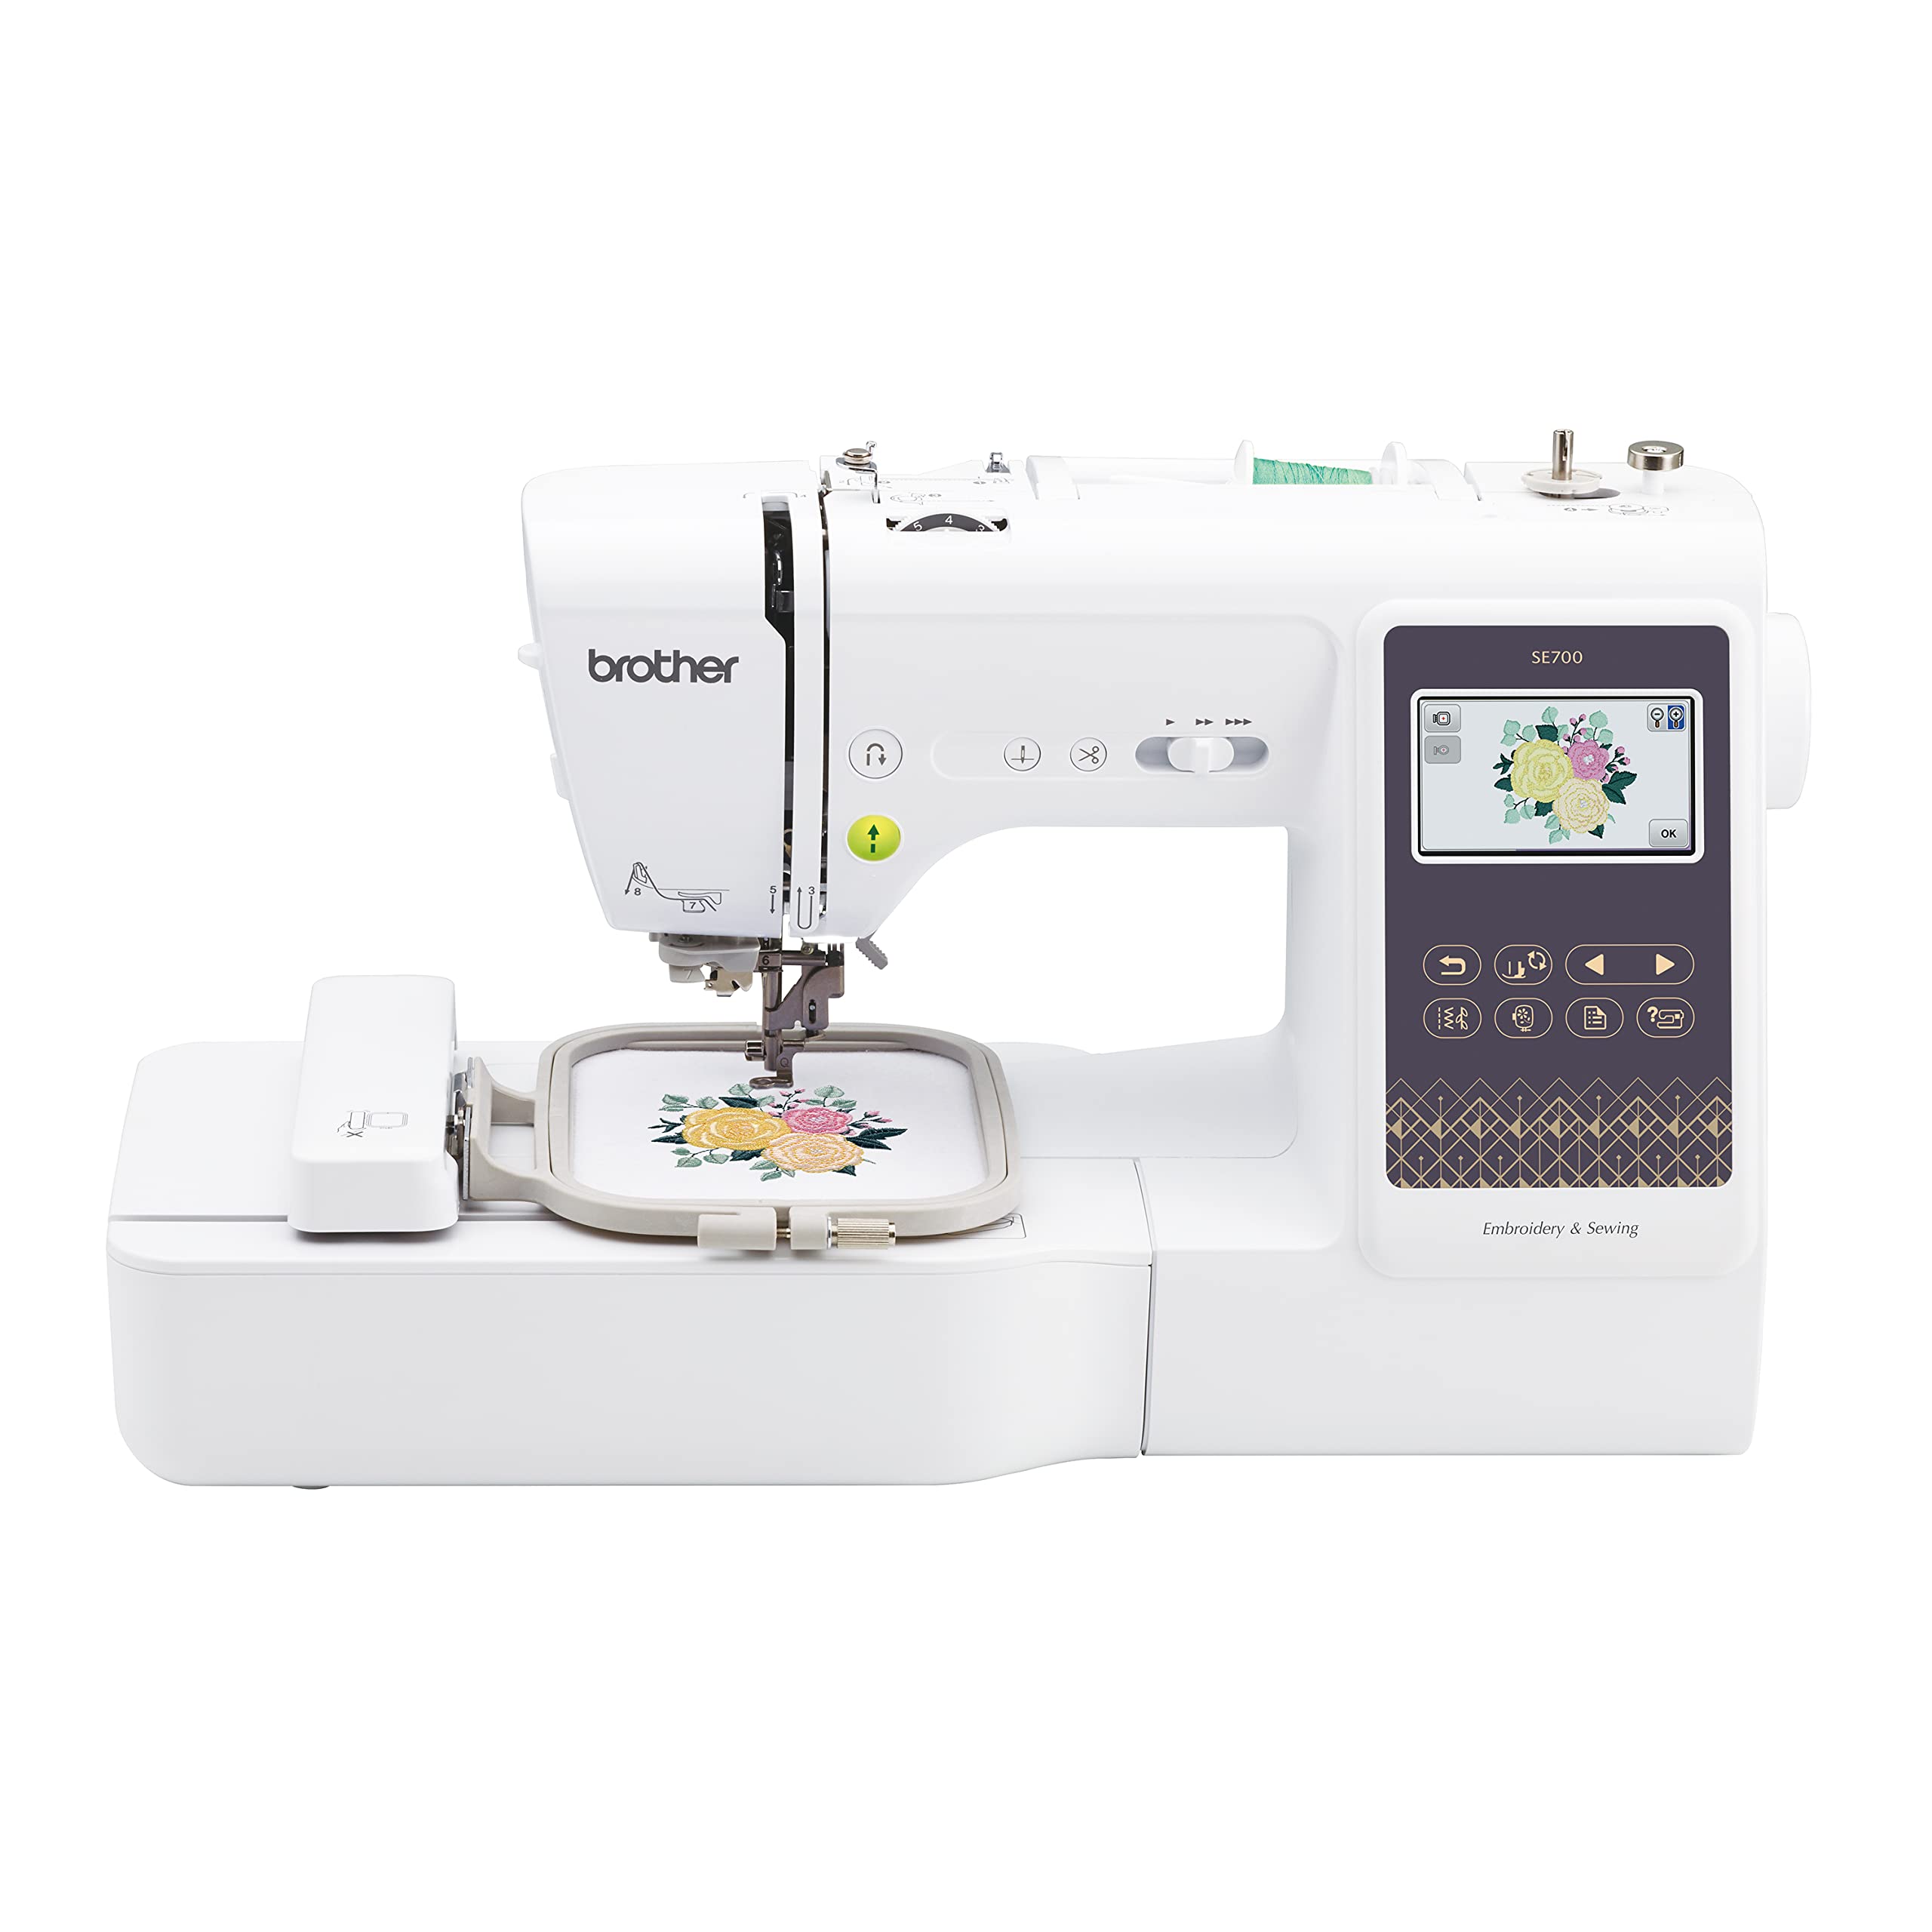 Brother SE700 Sewing and Embroidery Machine, Wireless LAN Connected, 135 Built-in Designs, 103 Built-in Stitches, Computerized, 4